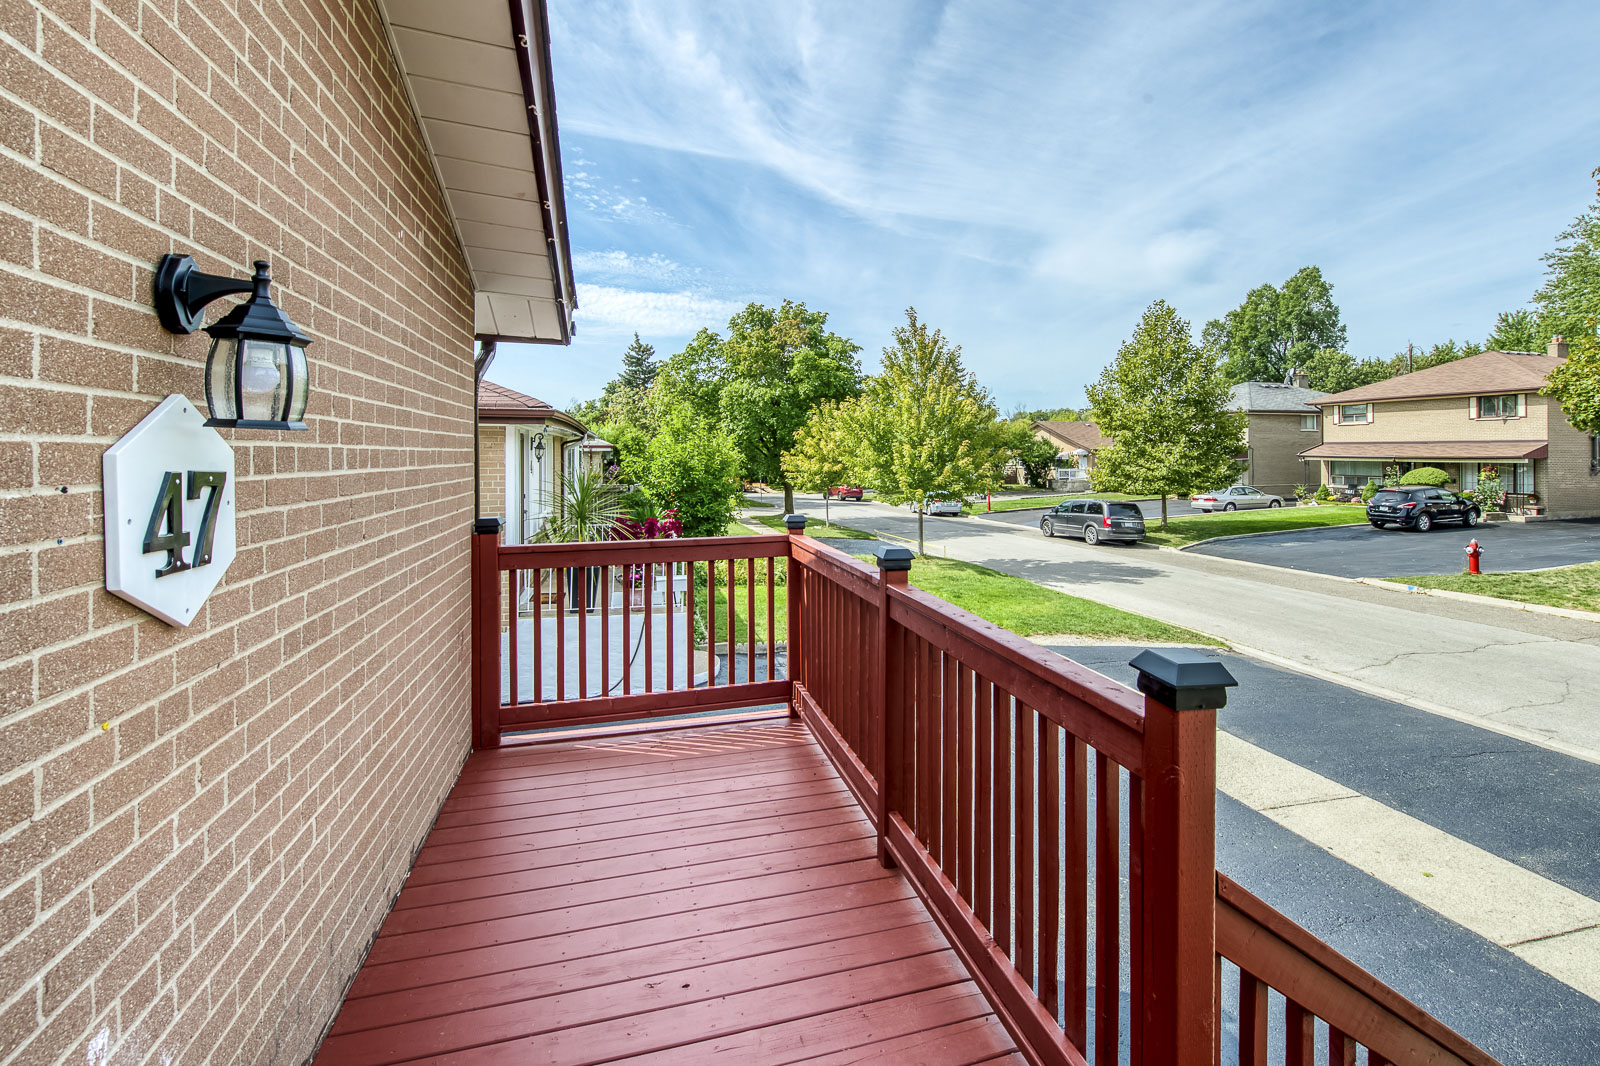 Corby Cres Deck